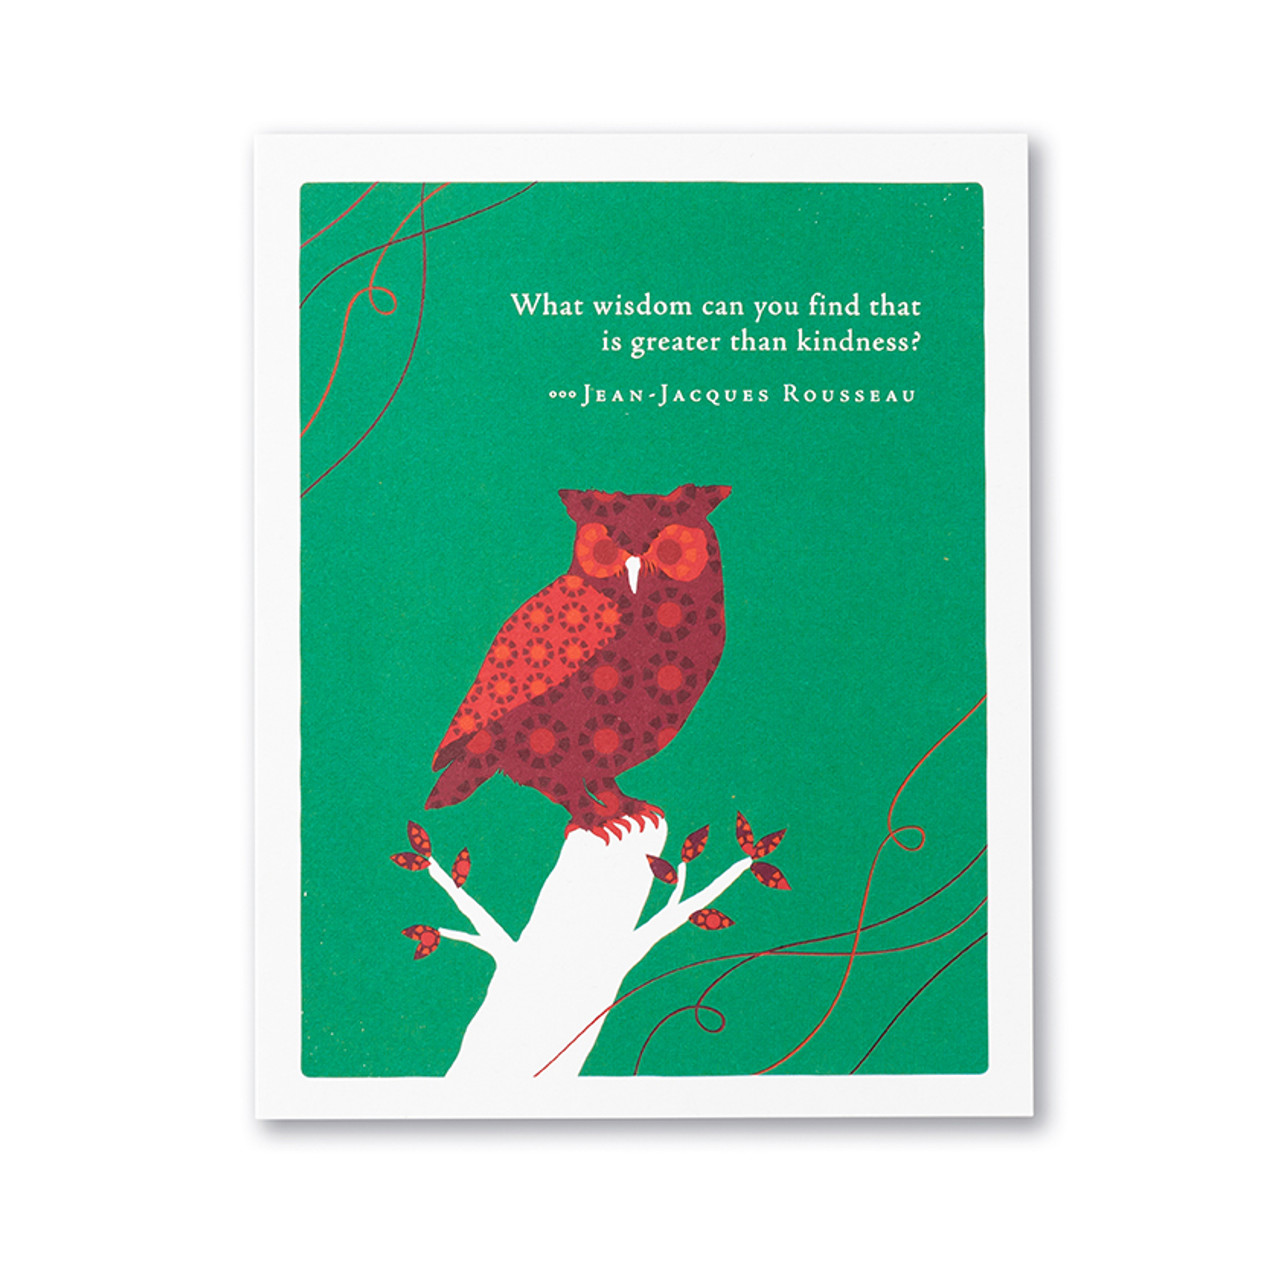 Positively Green Appreciation Greeting Card - “What wisdom can you find that is greater than kindness?" - JEAN-JACQUES ROUSSEAU - Mellow Monkey